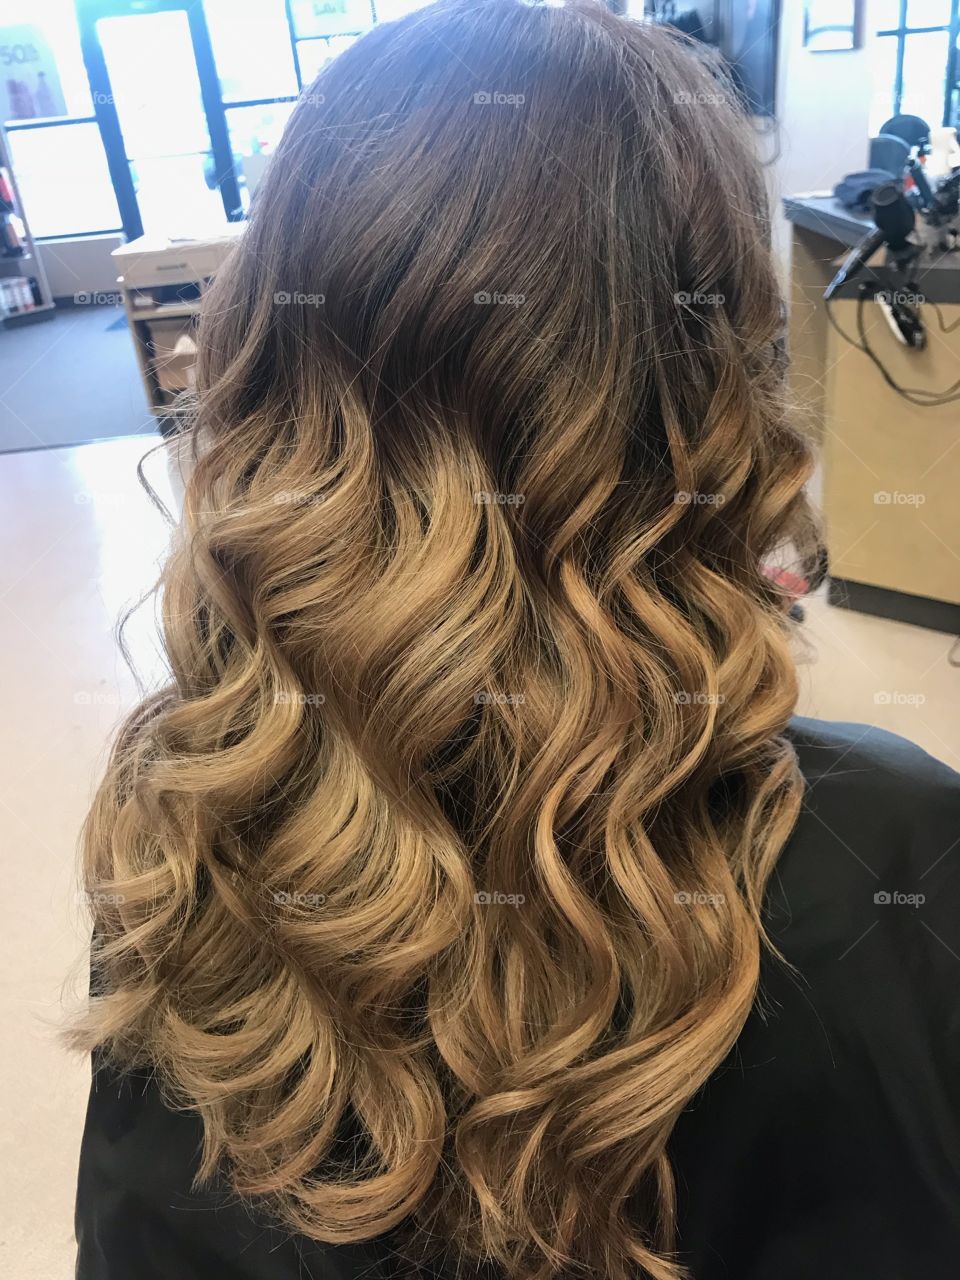 Hair styled in romantic waves 